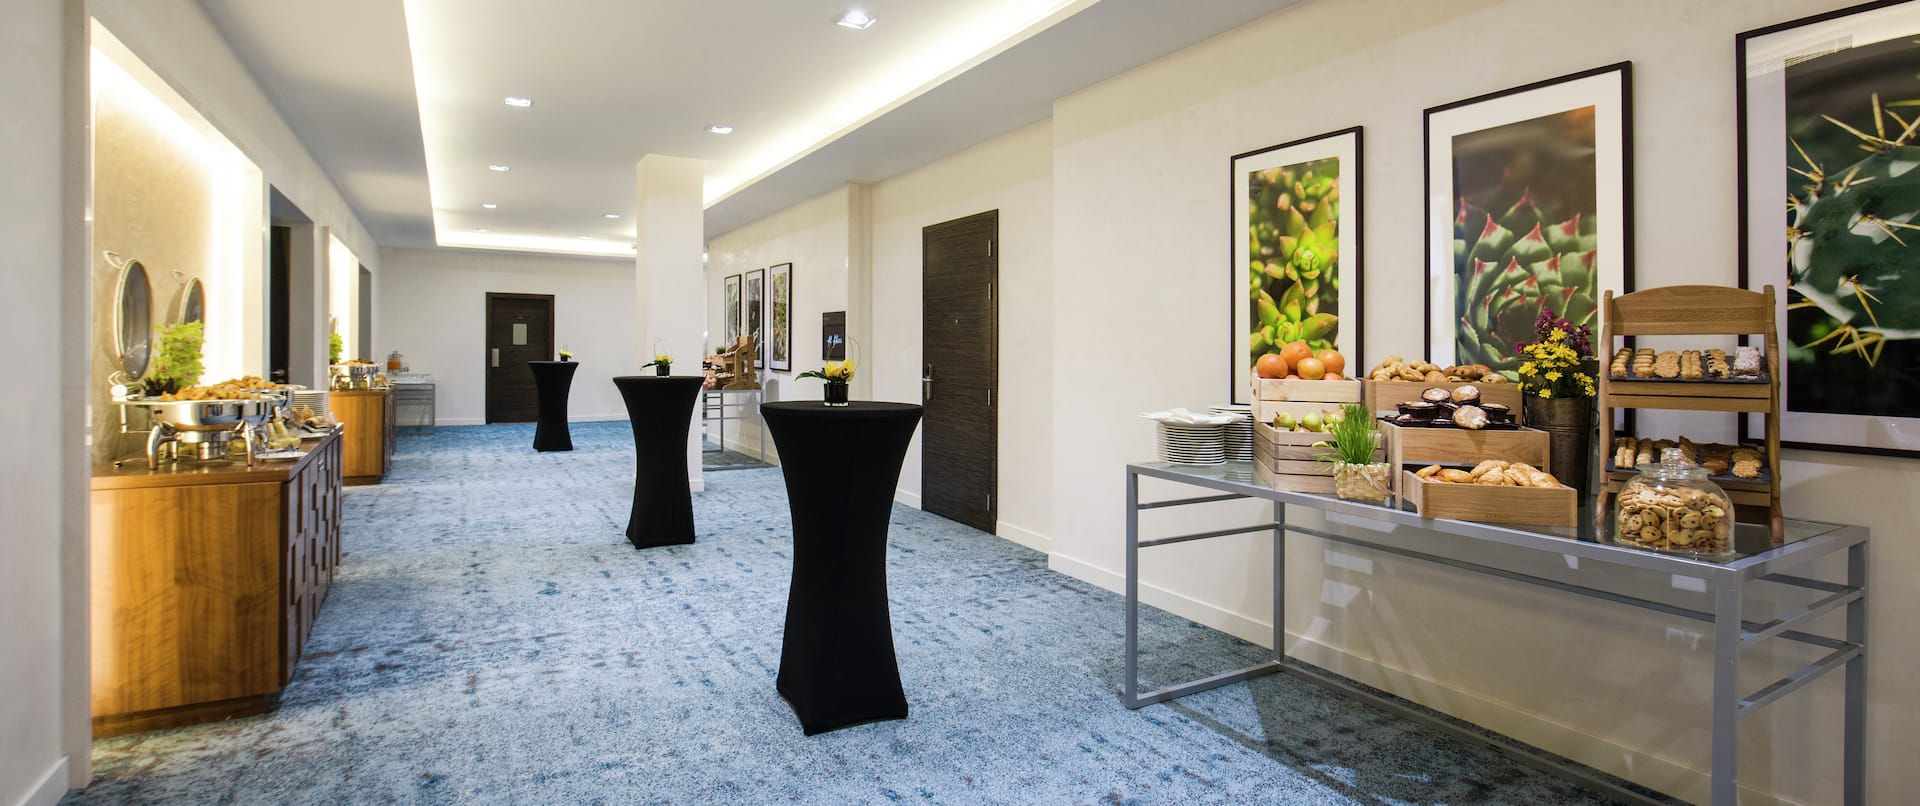 Food Service and Cocktail Tables in Foyer Area Outside of Meeting Space